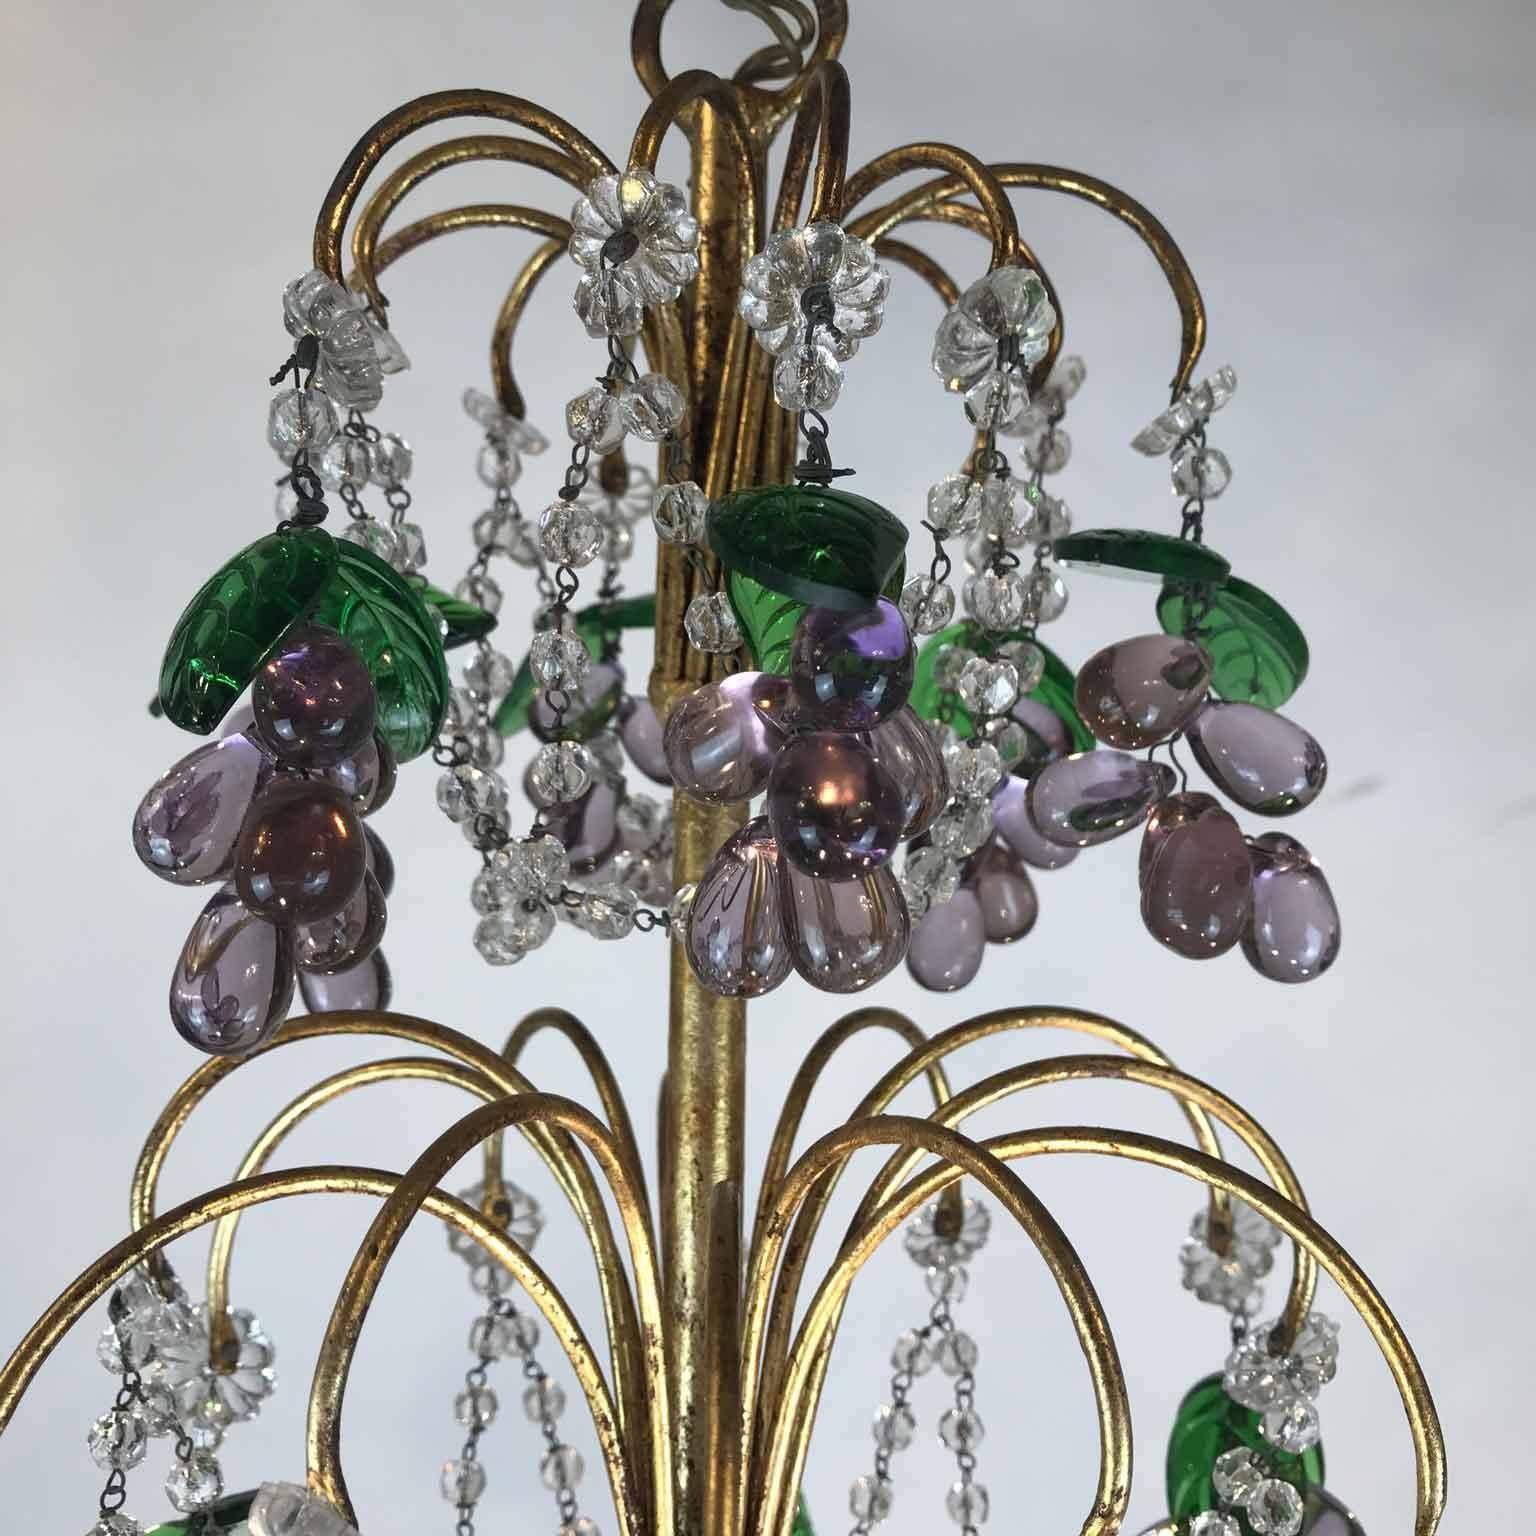 Pair of Mid-20th Century Italian Chandeliers with Purple Murano Glass Grapes 1